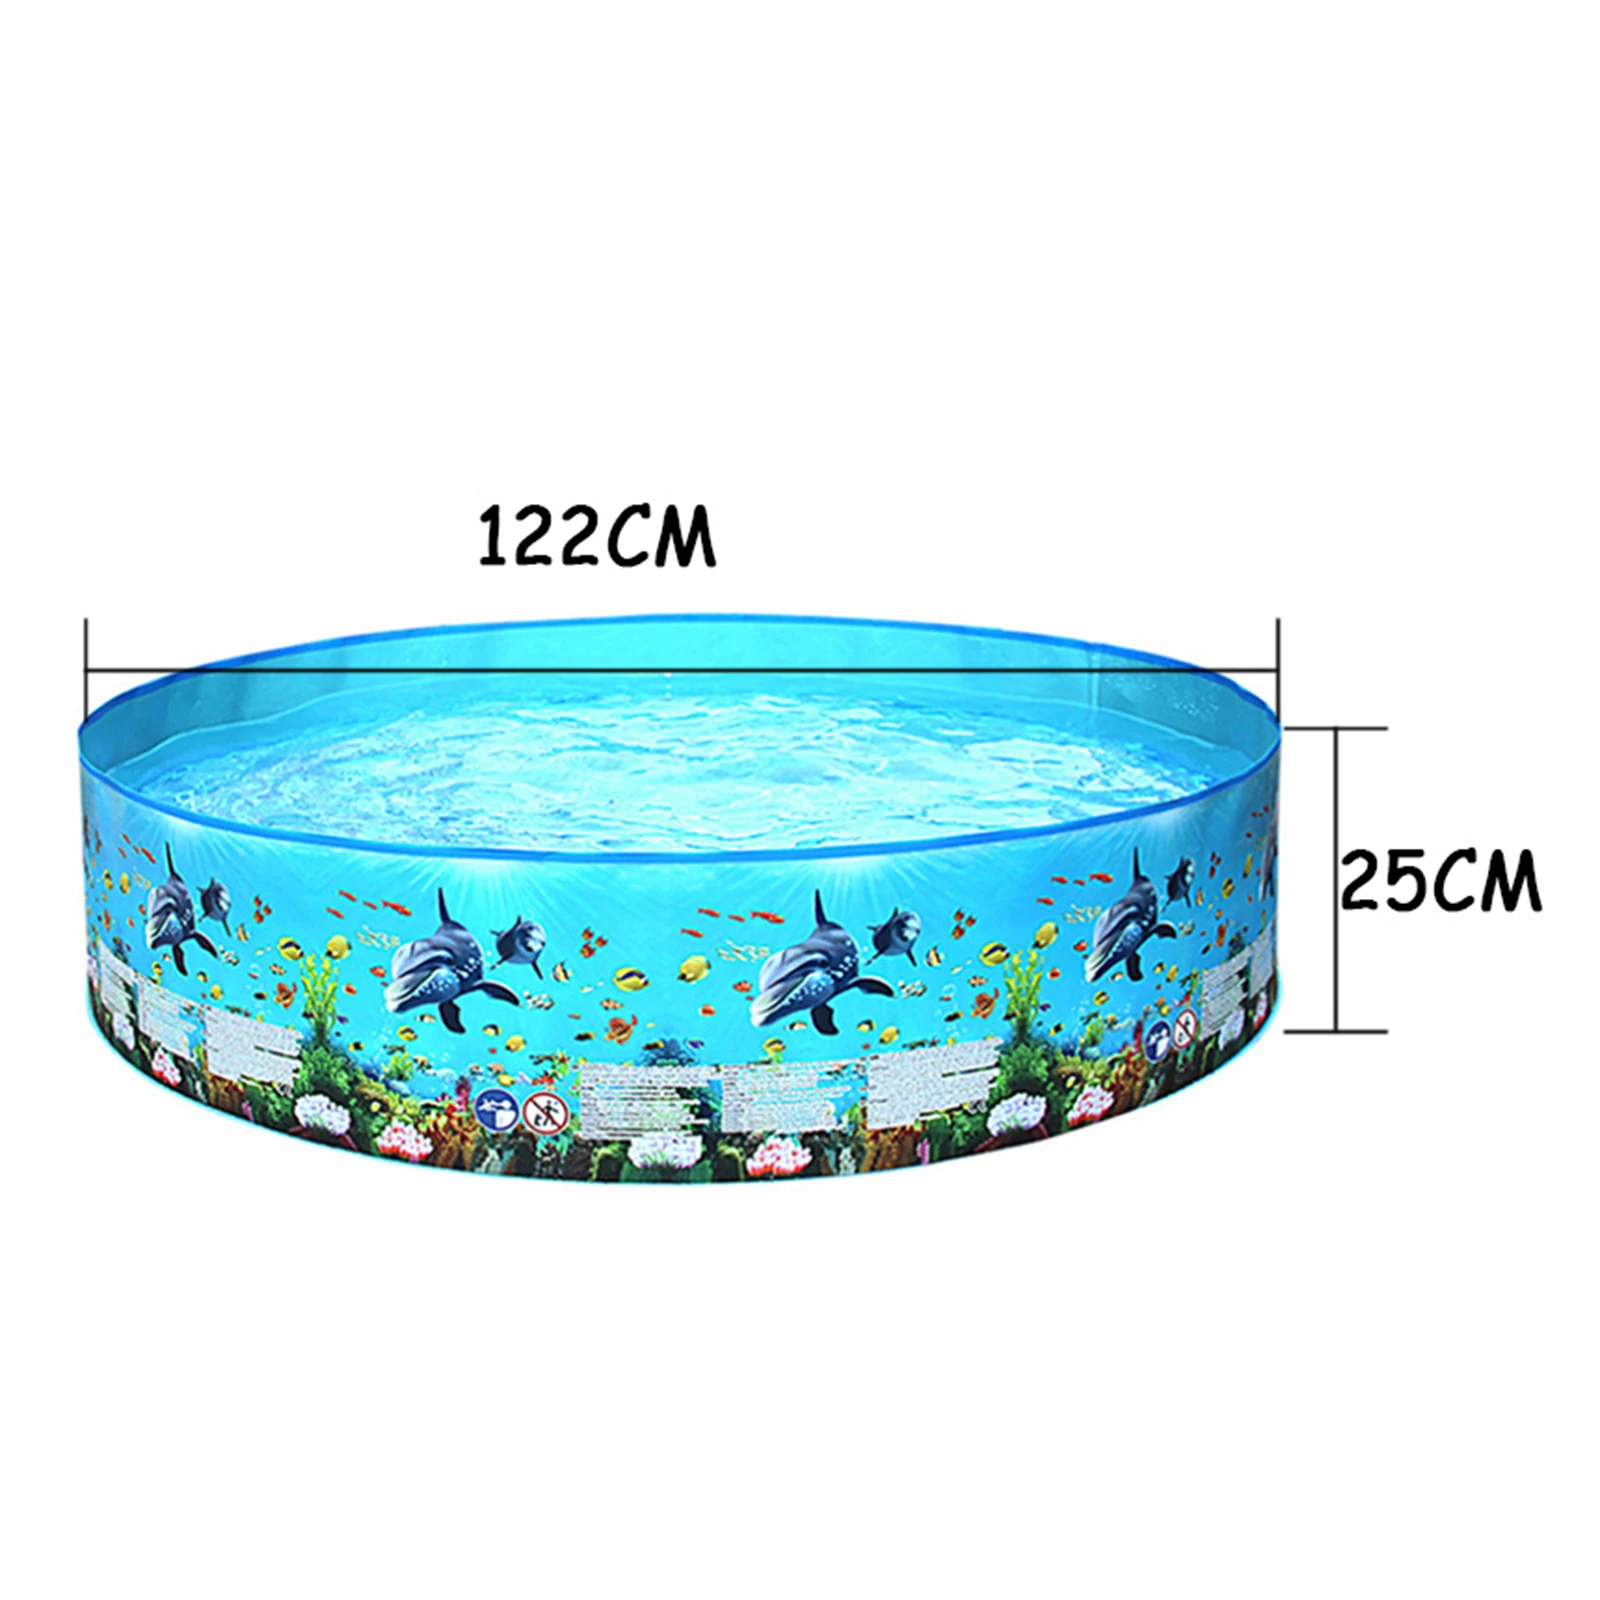 Details about   Snapset Swimming Pool for Kids Bath Pool Collapsible for Dogs Cats and Kids 